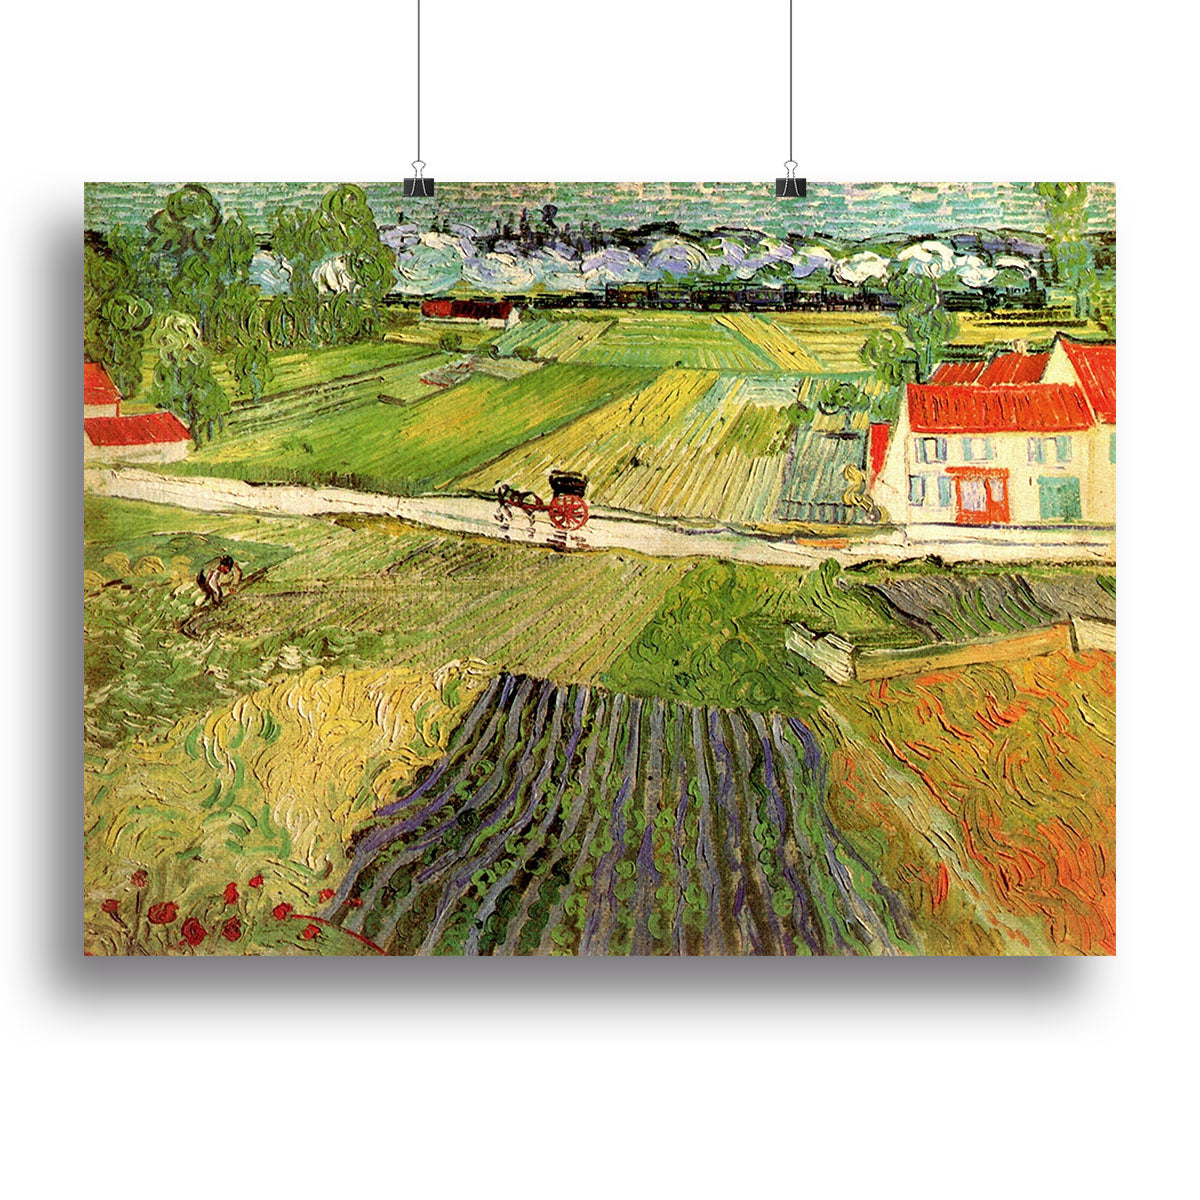 Landscape with Carriage and Train in the Background by Van Gogh Canvas Print or Poster - Canvas Art Rocks - 2